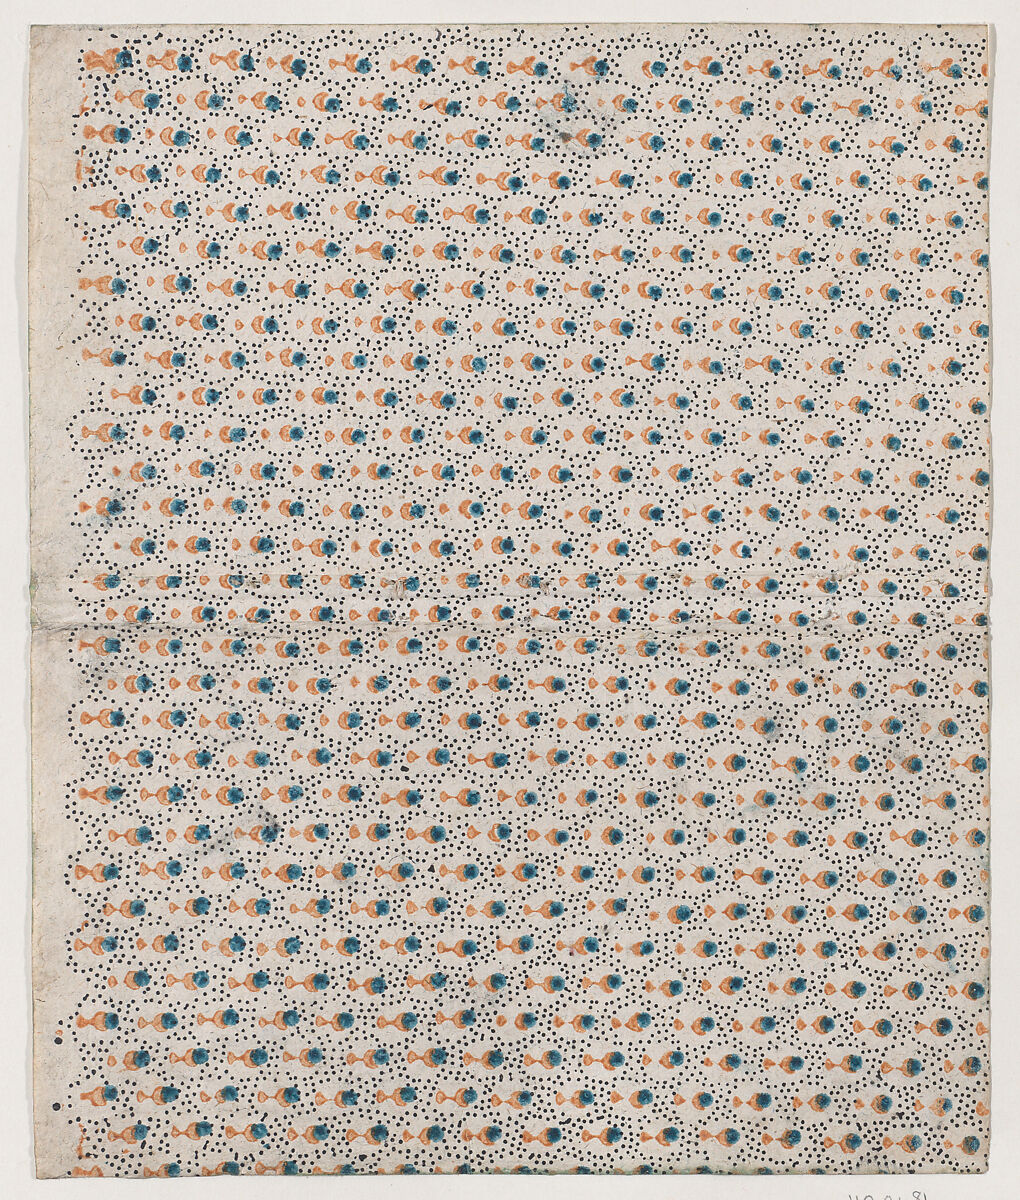 Book cover with overall pattern of orange and blue dots, Anonymous  , 19th century, Relief print (wood or metal) 